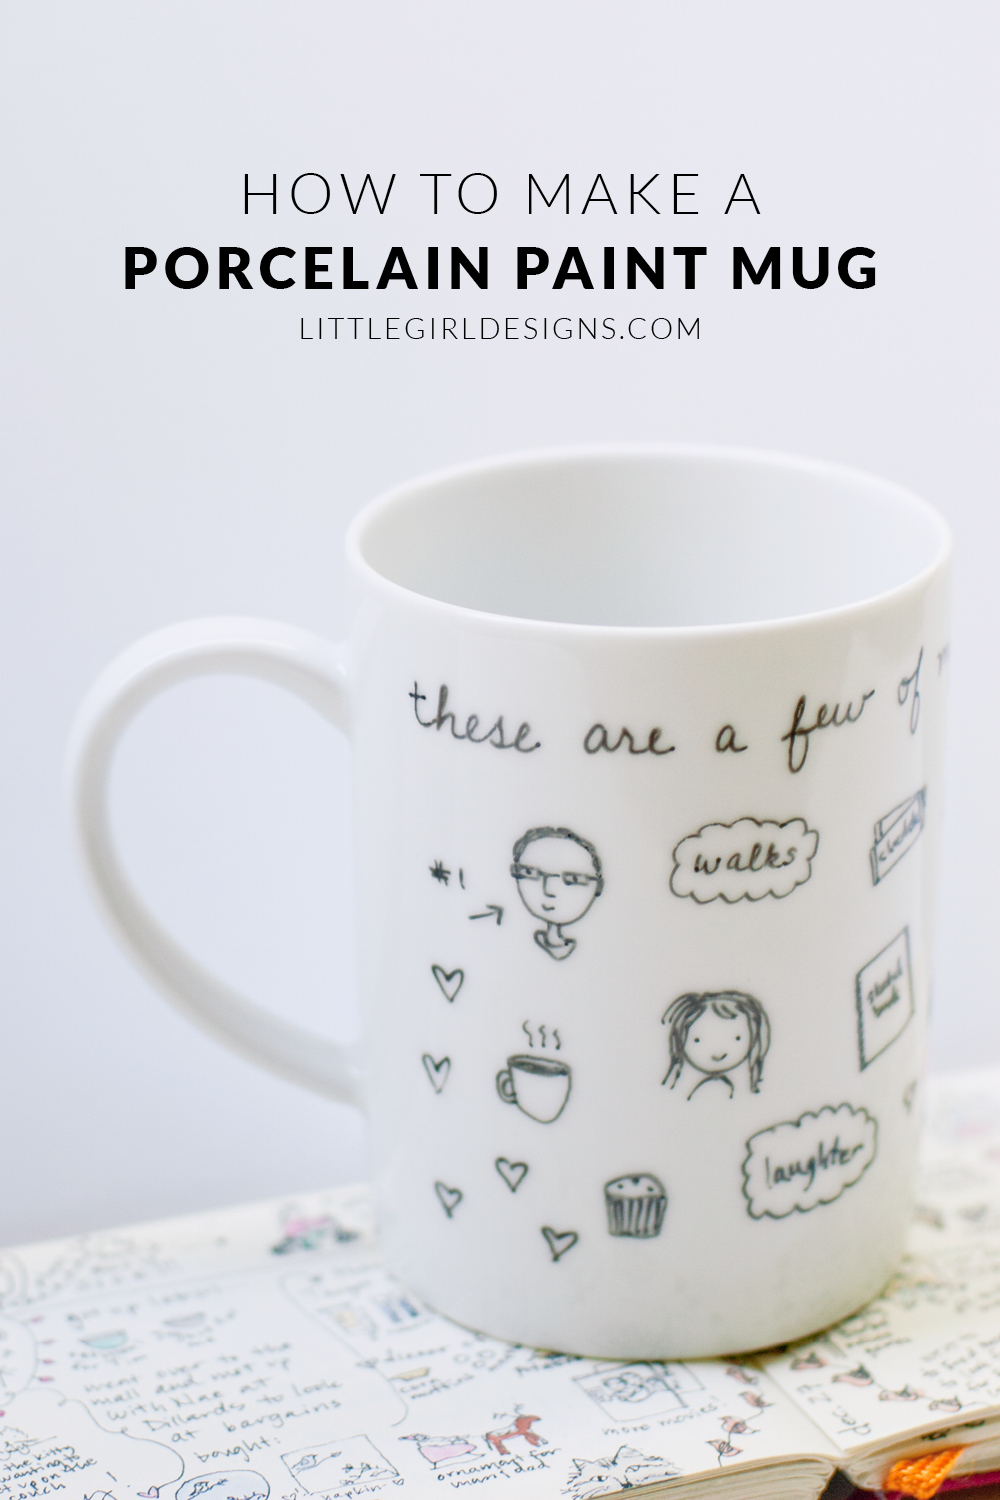 Tips on How to Make a Porcelain Paint Mug - Here are some tips on how to use porcelain paint pens to make a personalized mug that lasts! at littlegirldesigns.com